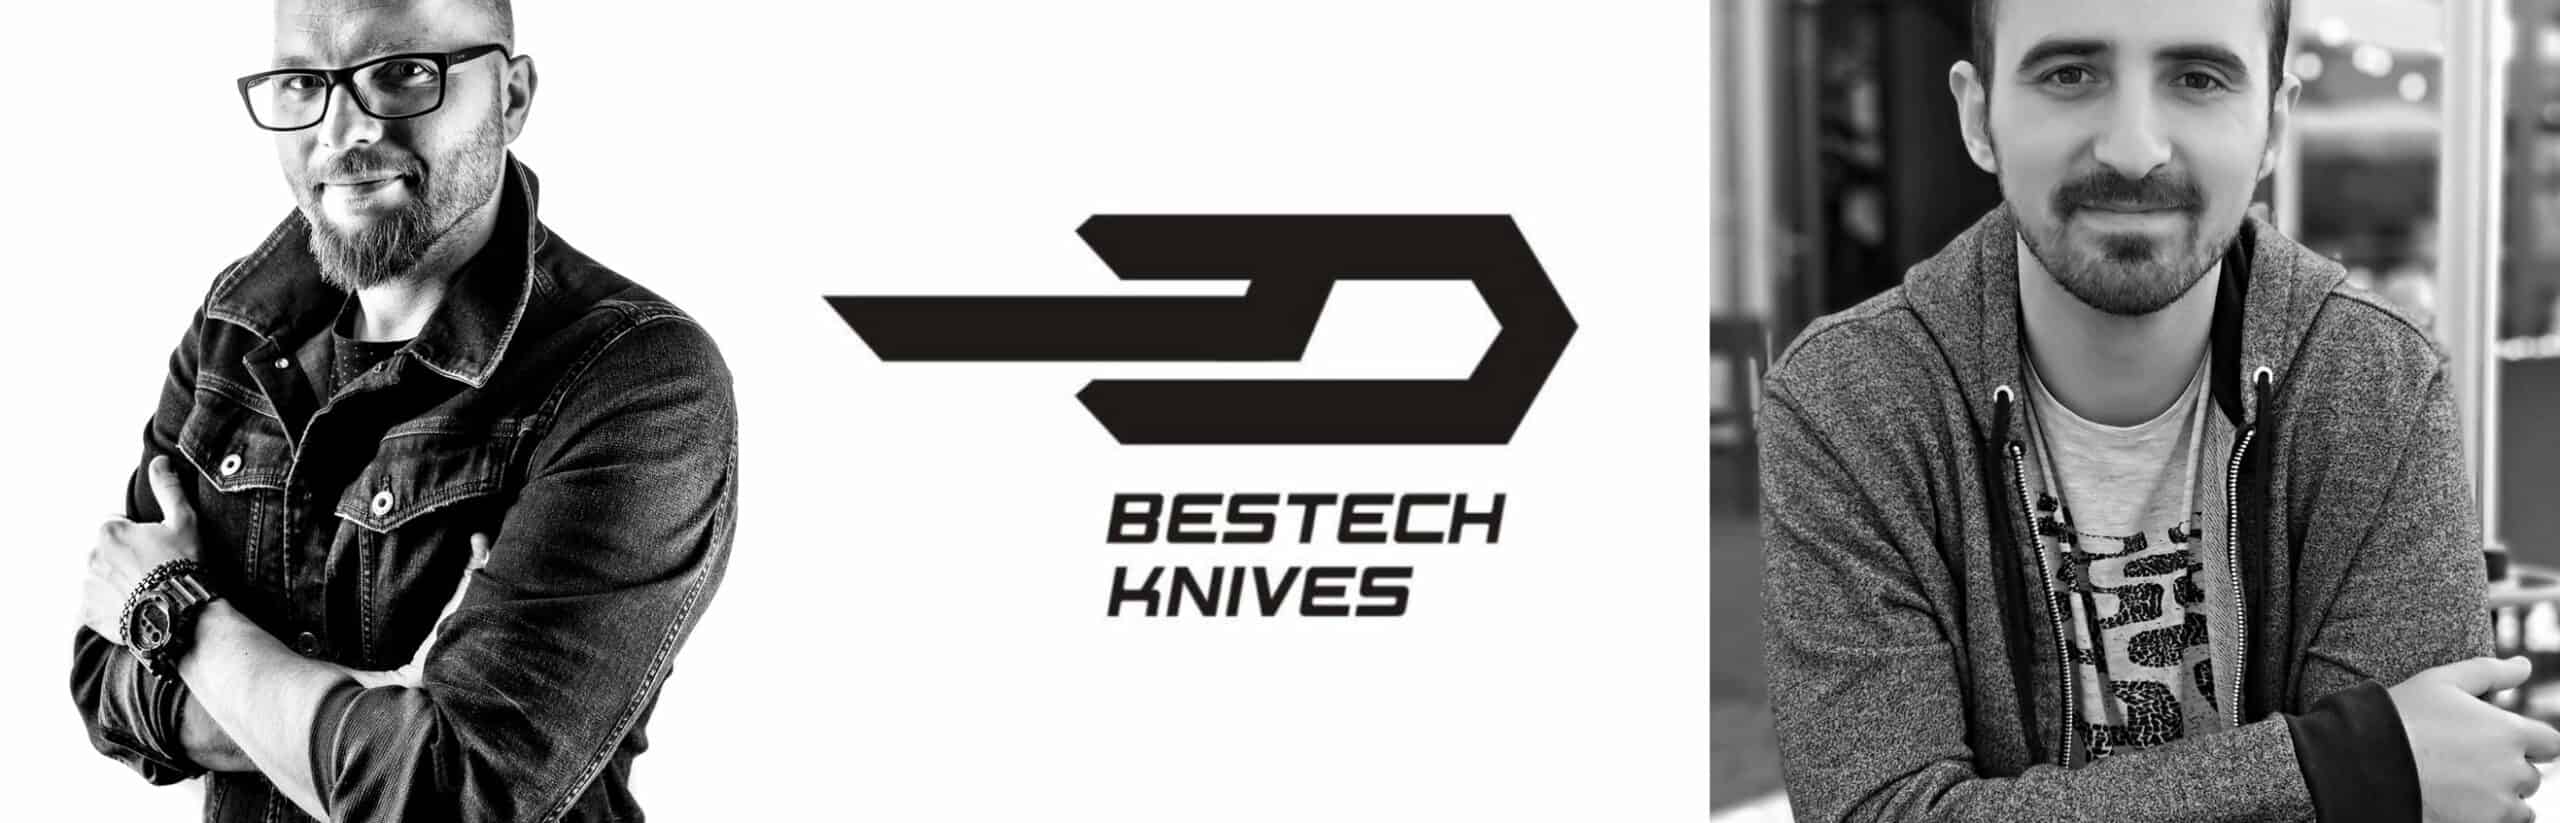 Xin Cutlery is BesTech's kitchen knife brand featuring knives designed by pocket knife designers.